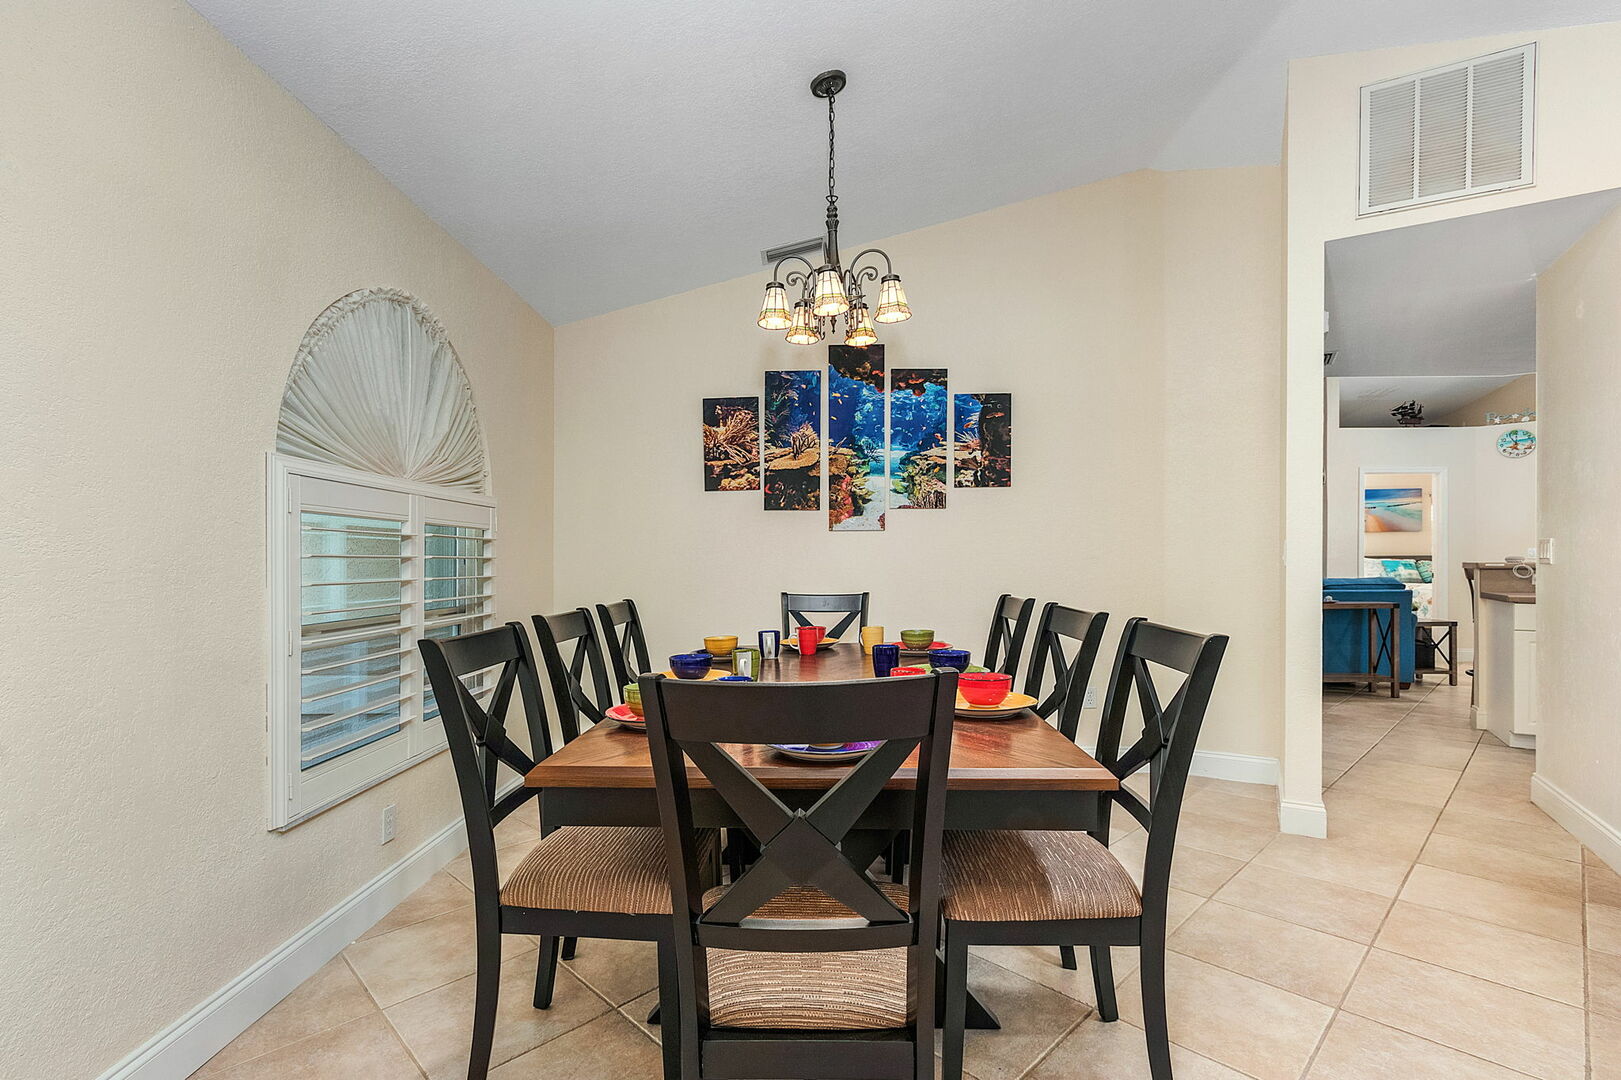 DINING AREA
(8-Person Dining Table, Dishware & Flatware Provided)